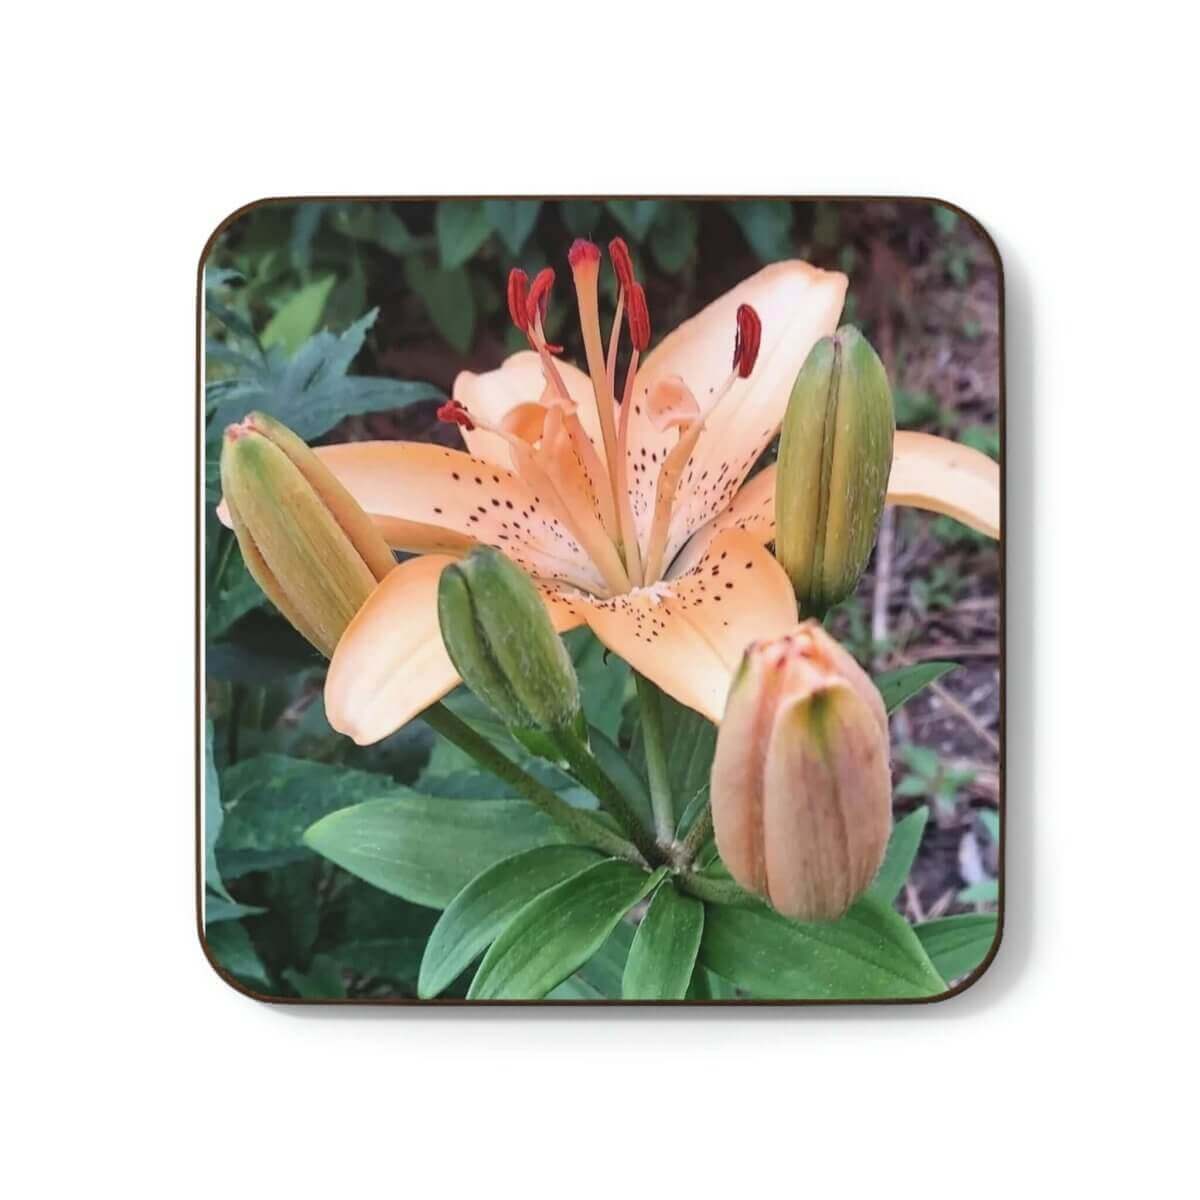 Lilly Design Coaster - Hearth Home & Living